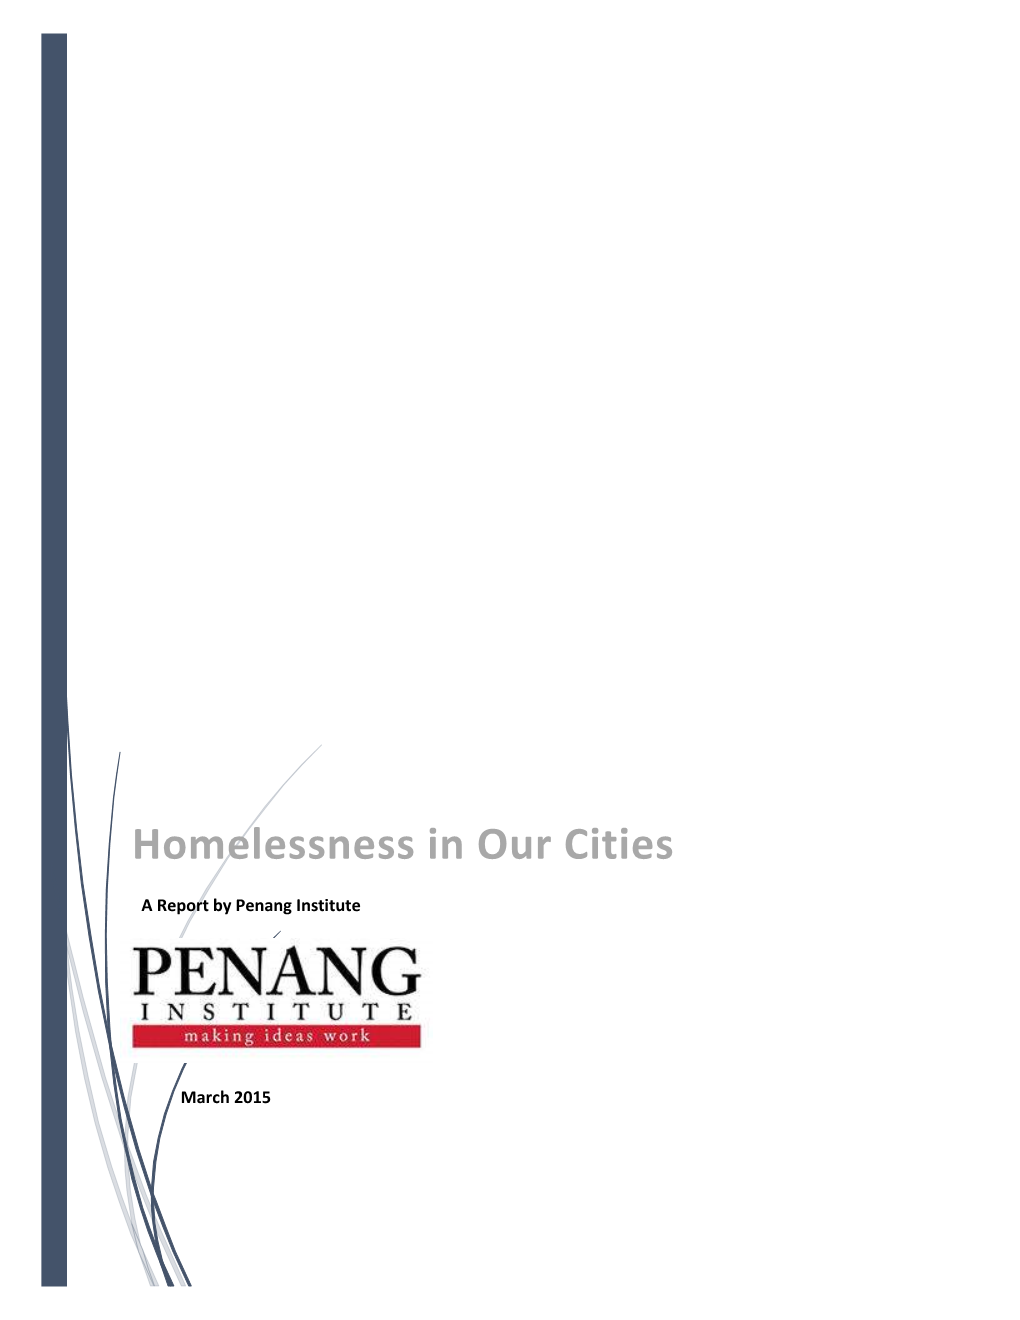 Homelessness in Our Cities